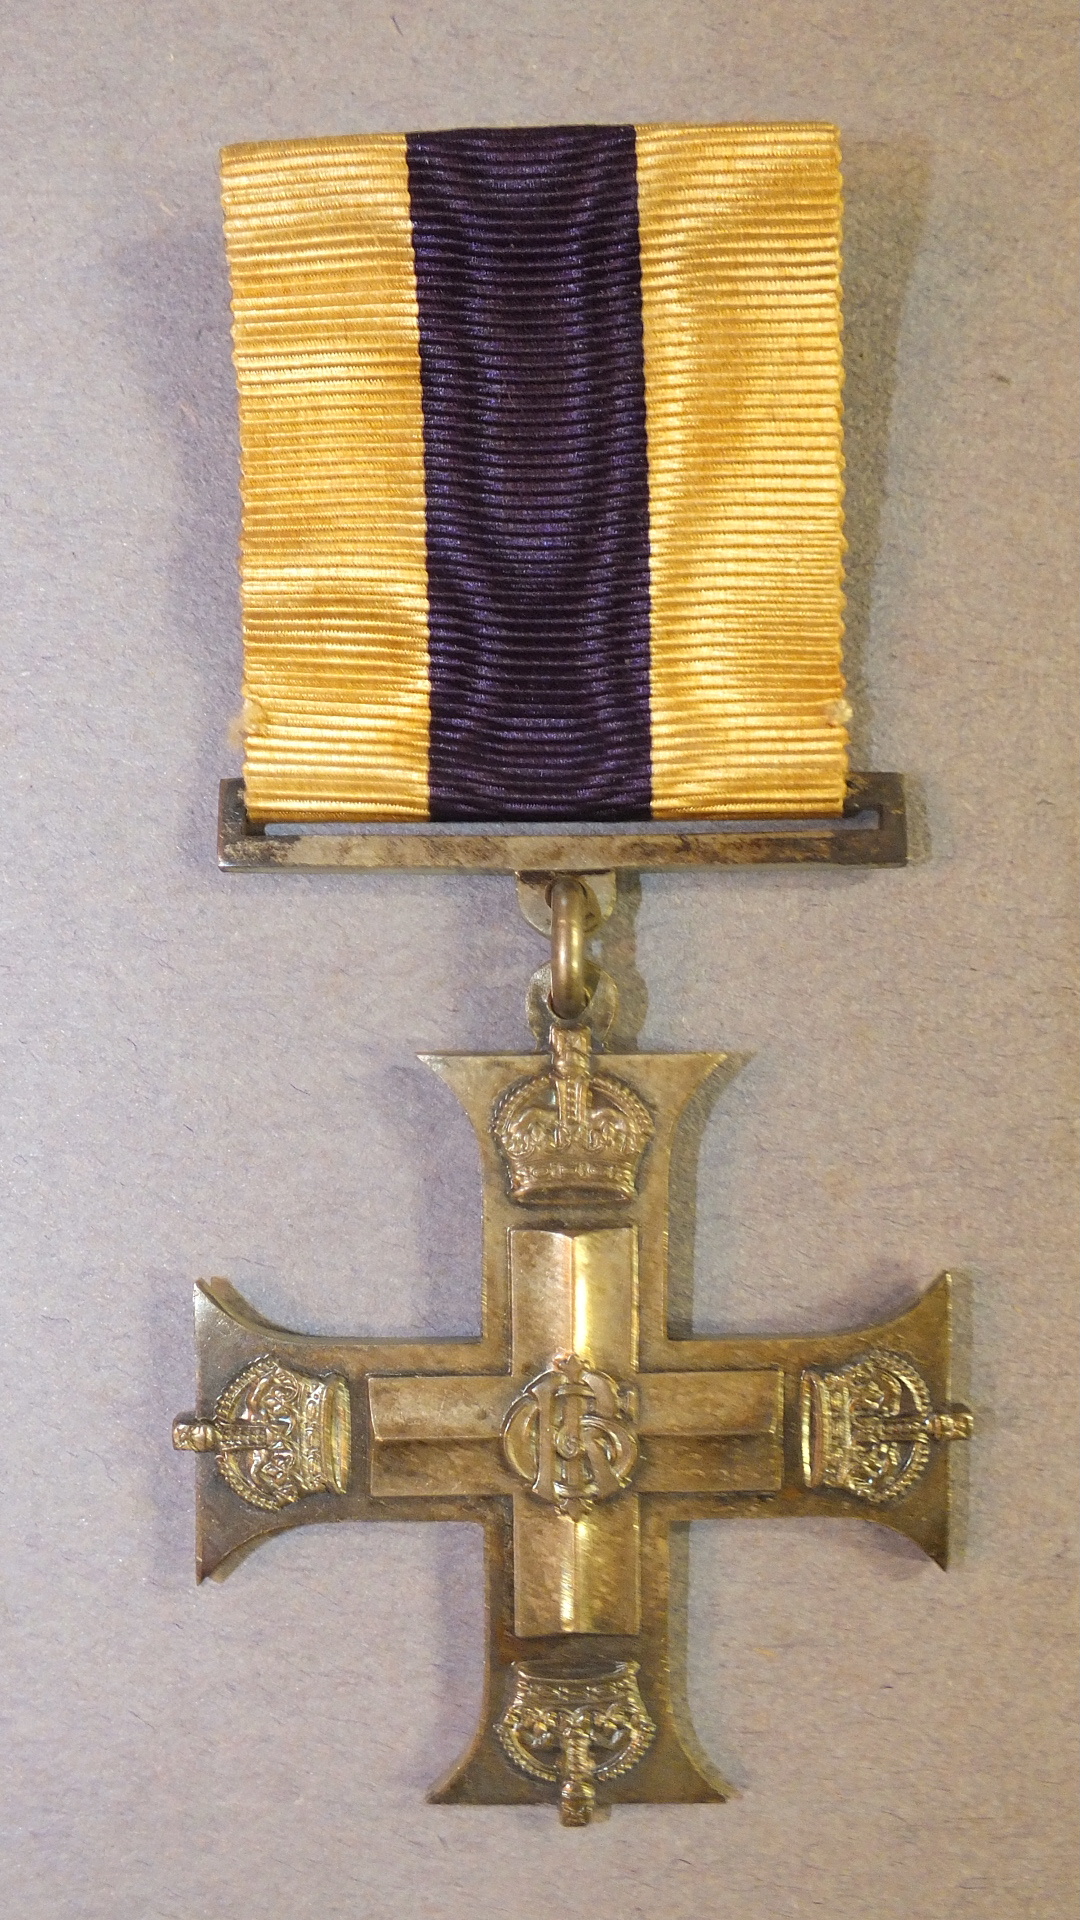 A WWI Military Cross group of three medals awarded to Captain William Robertson RAMC, Duke of - Image 3 of 7